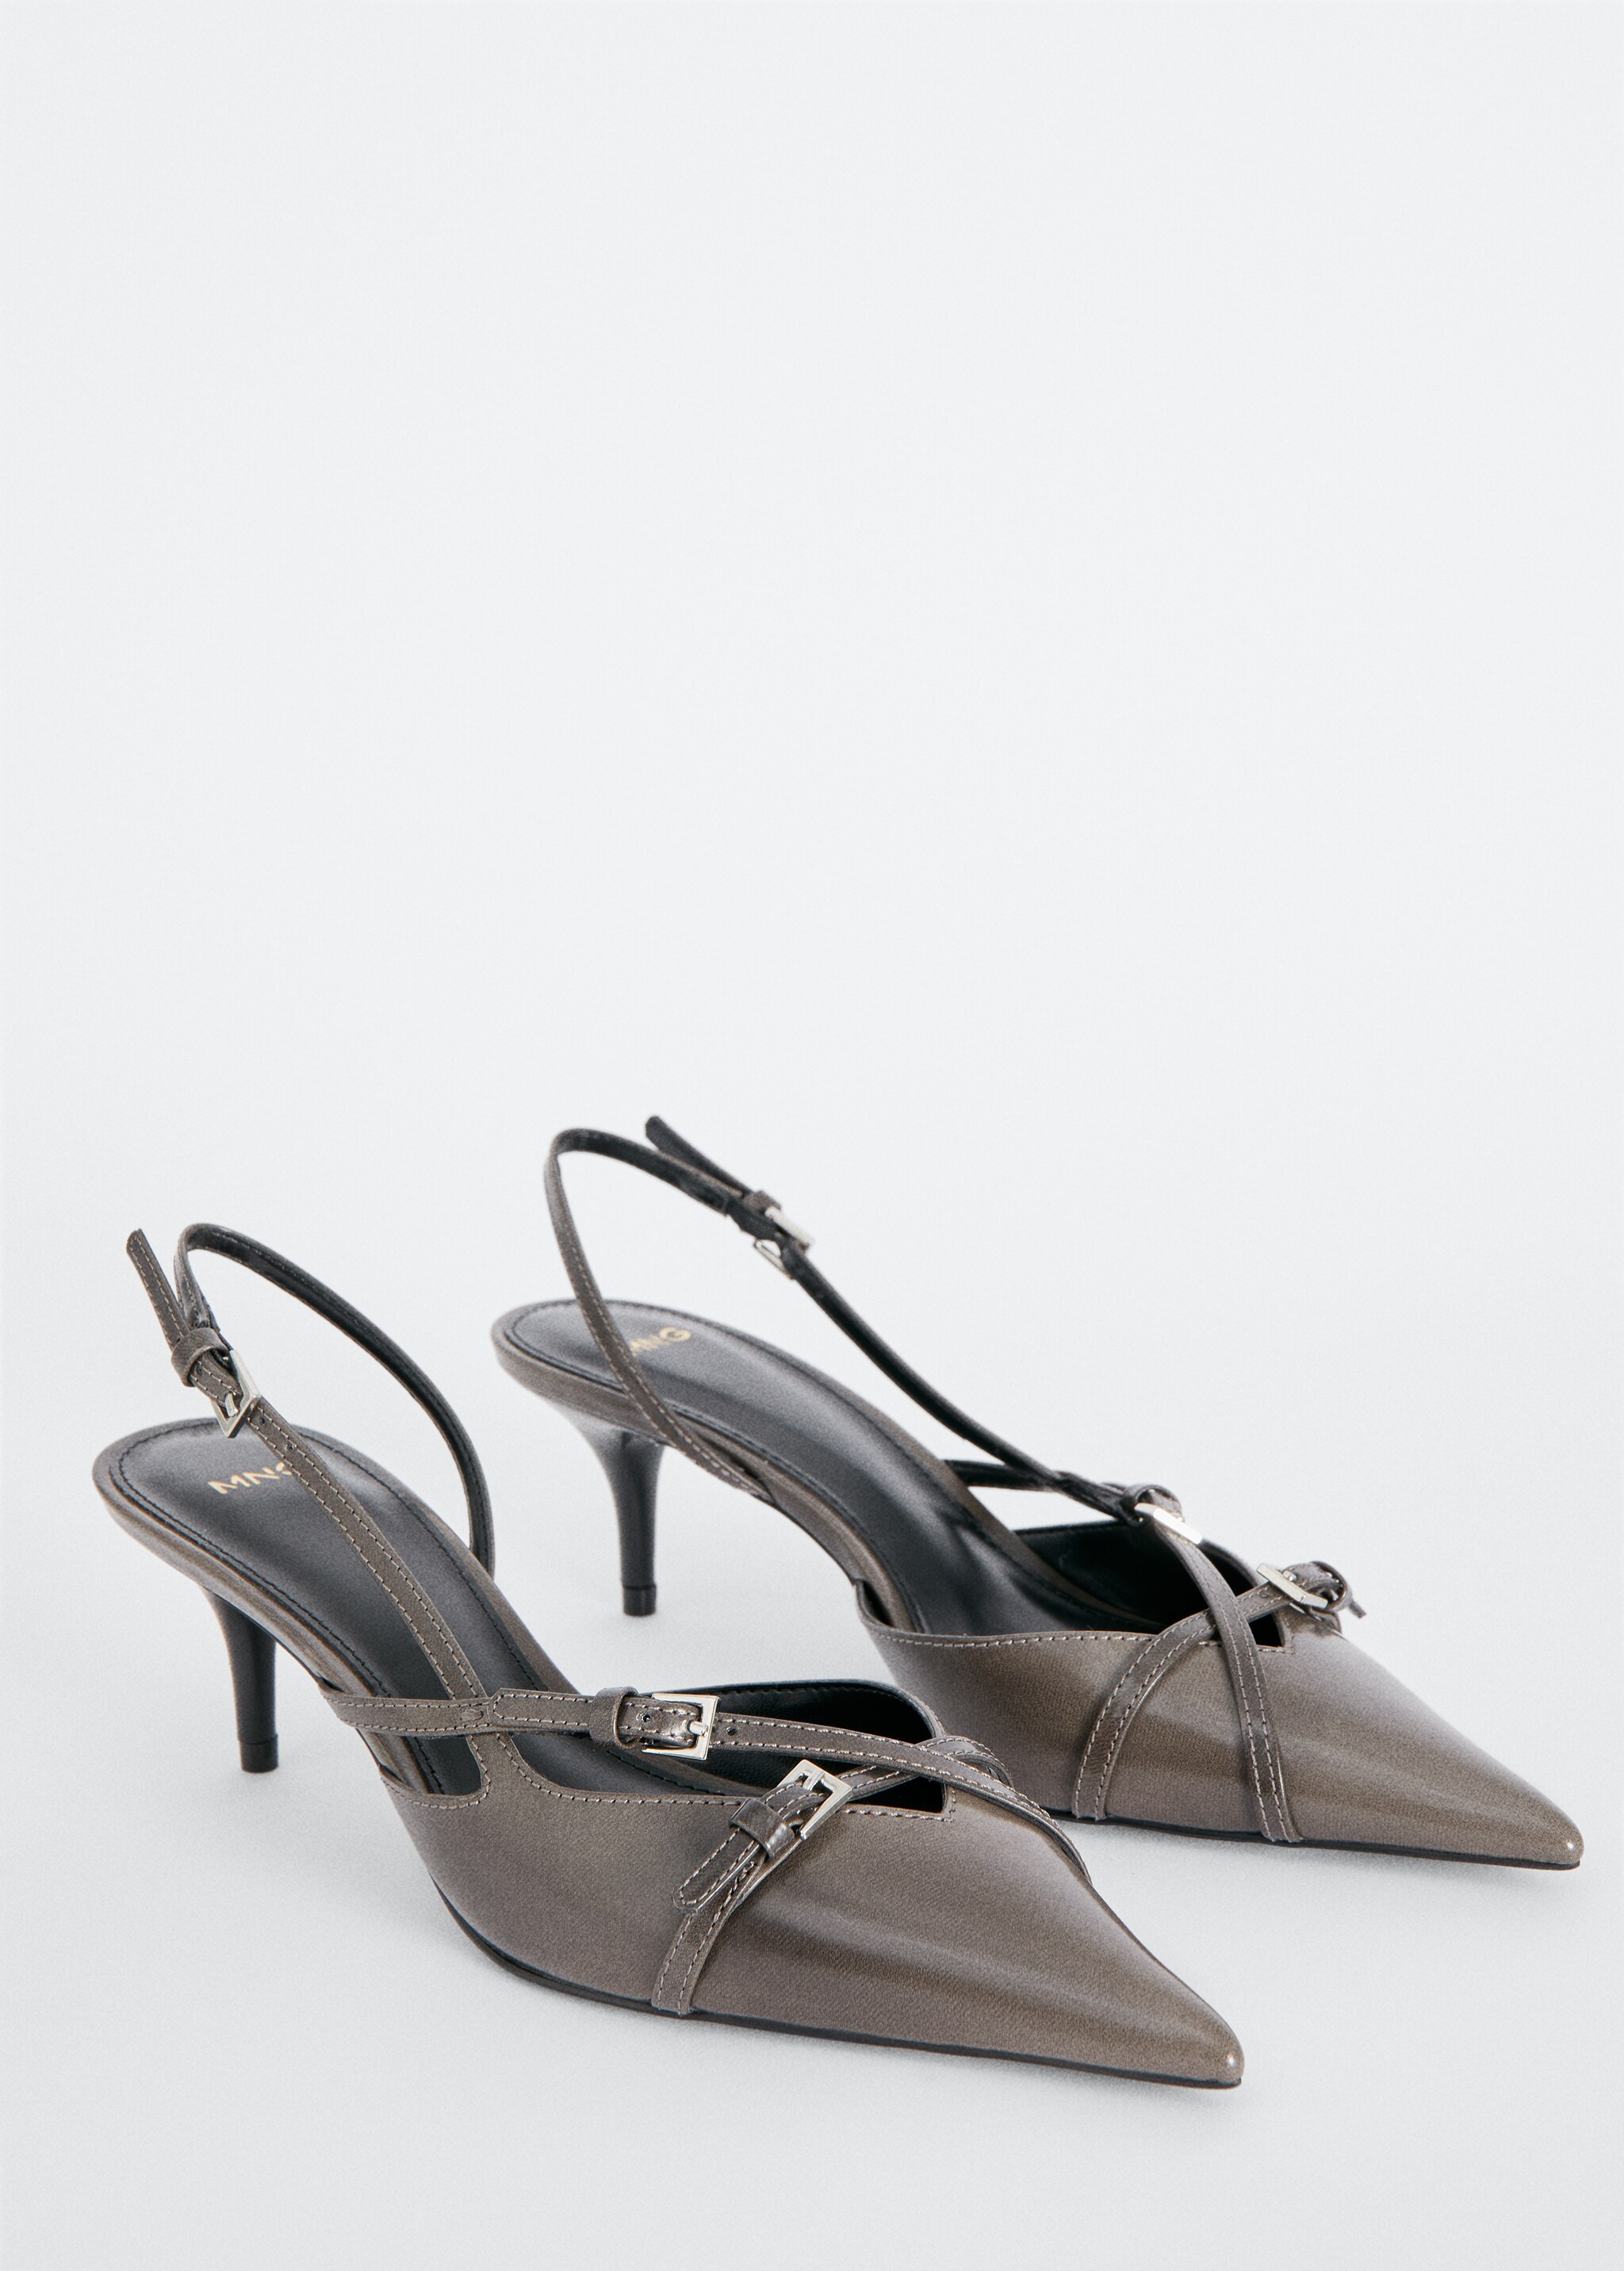 Leather heeled slingback shoes with buckles - Medium plane